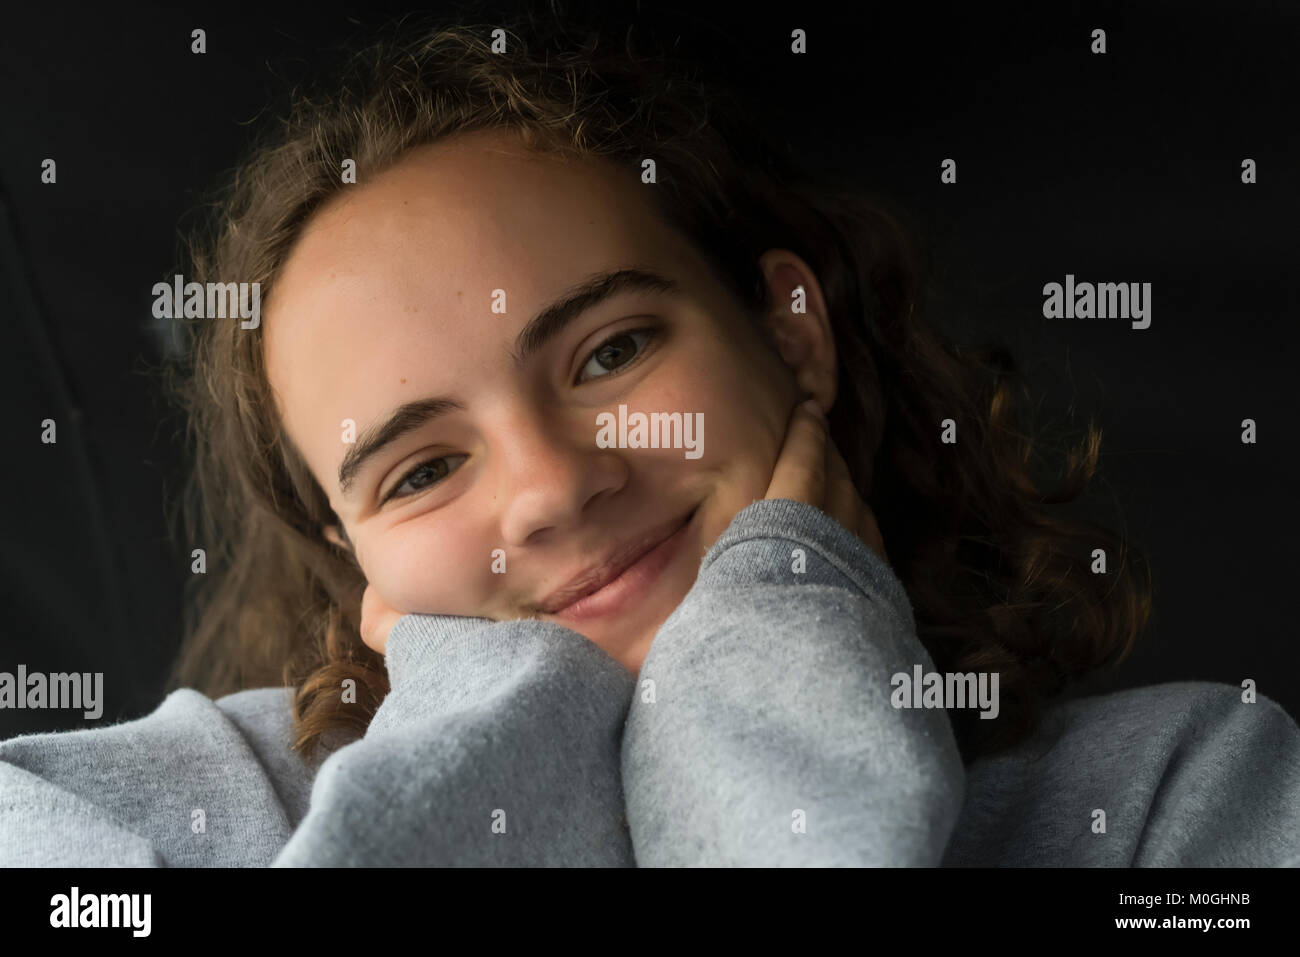 Portrait of a teenage girl; Lake of the Woods, Ontario, Canada Stock Photo